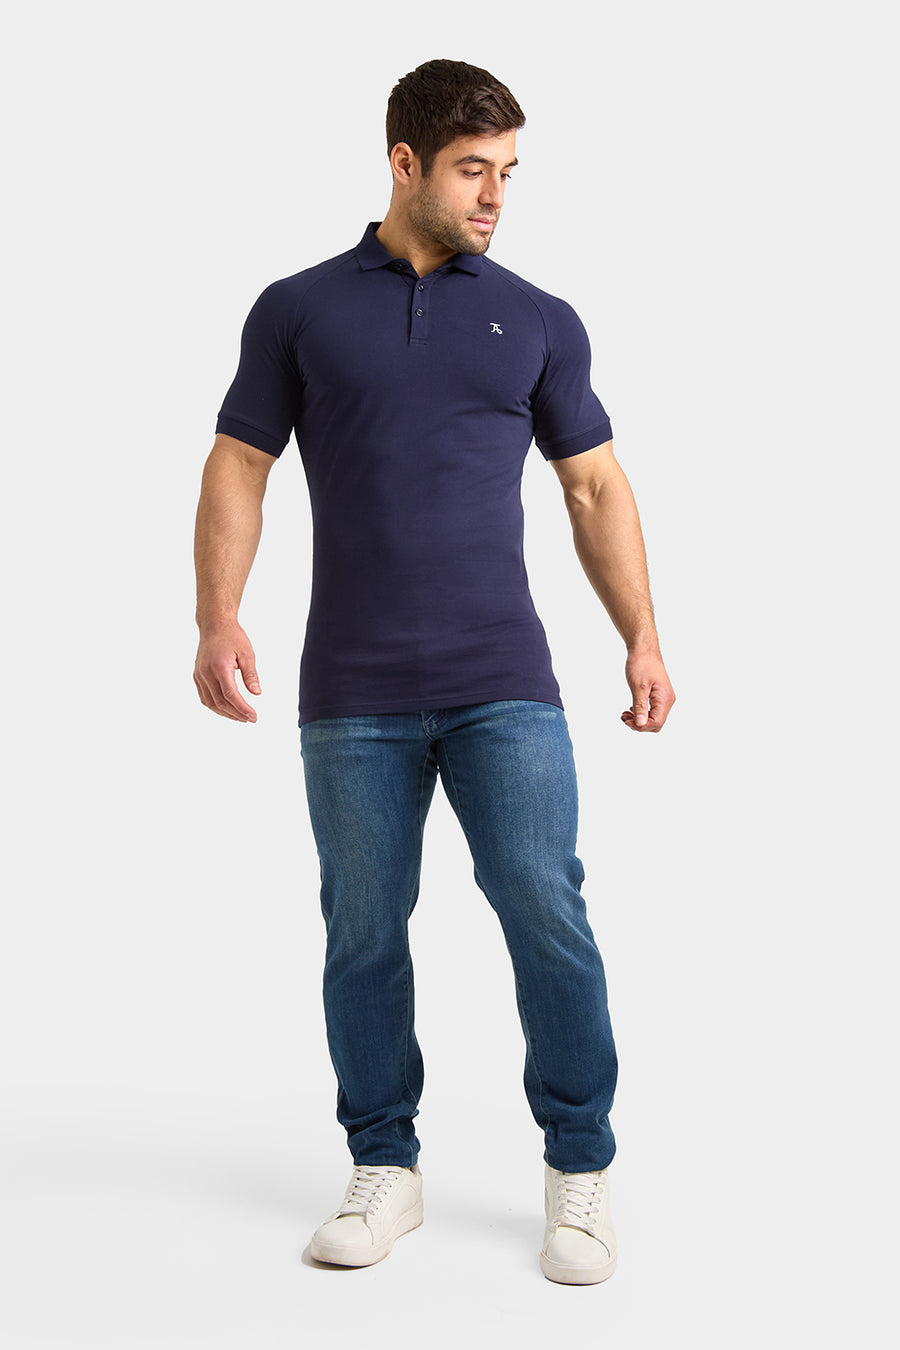 Athletic Fit Polo Shirt in True Navy - TAILORED ATHLETE - USA